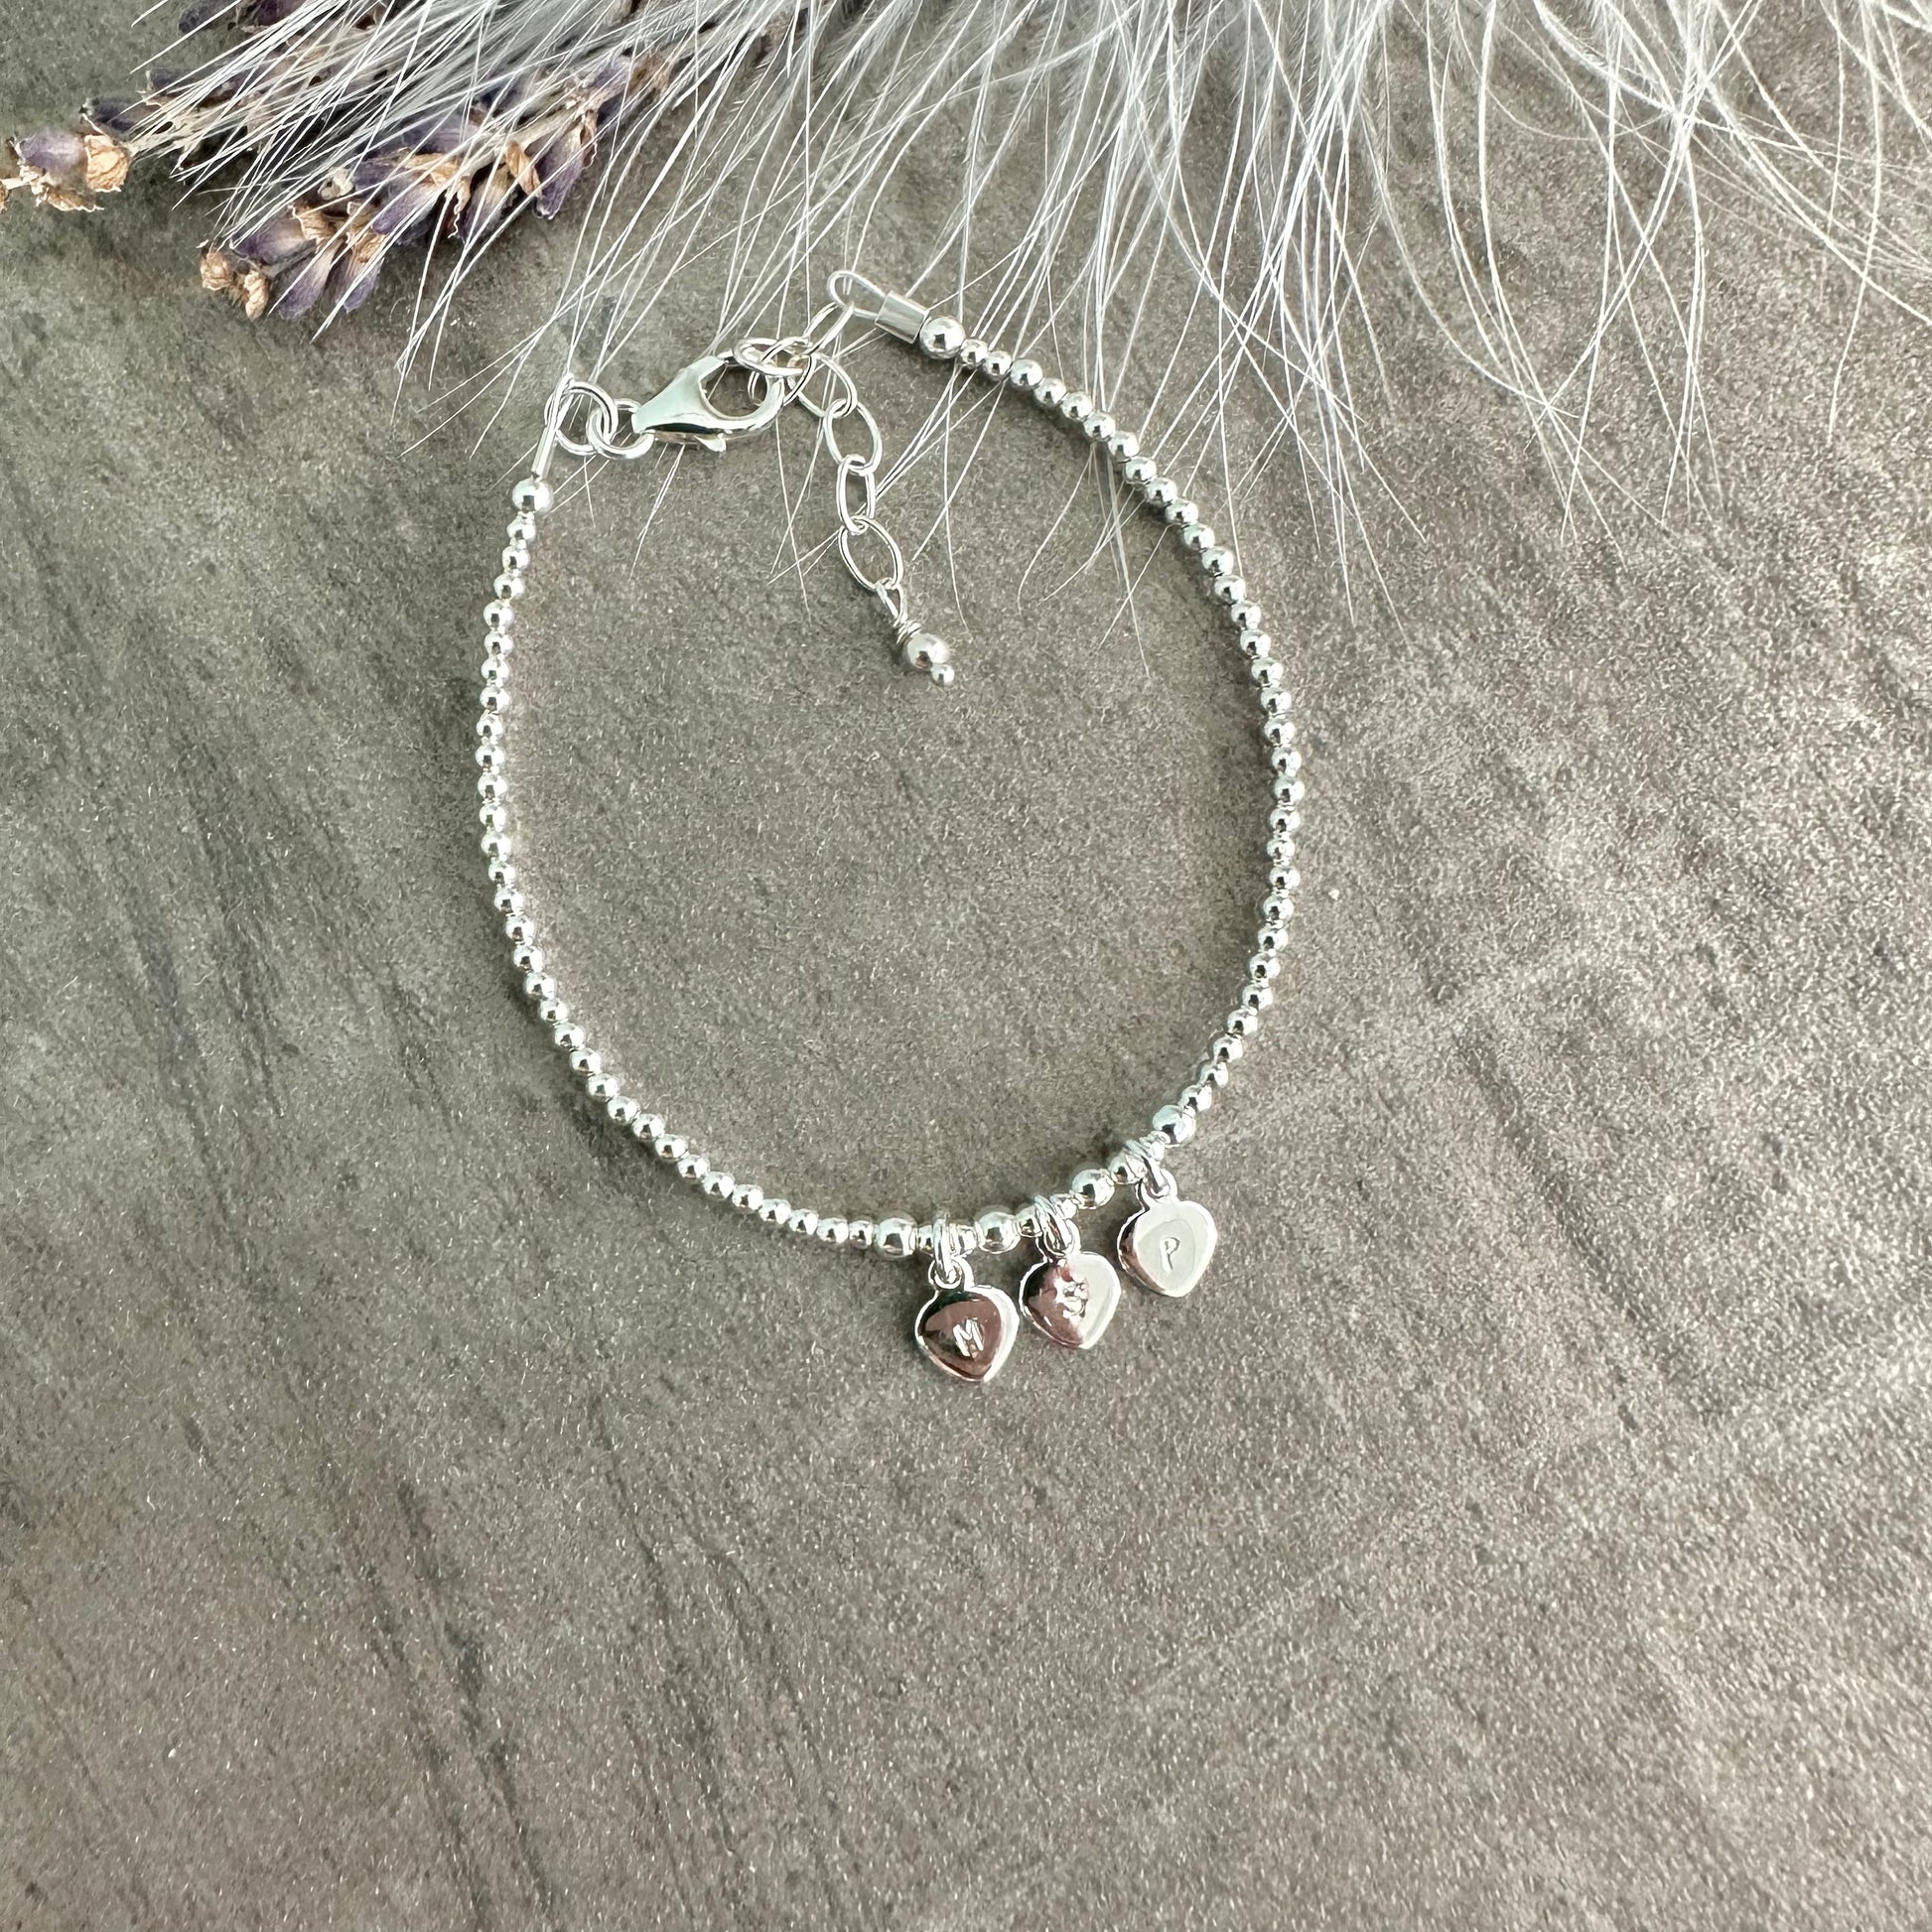 Sterling Silver Initials Bracelet, Gift for mother family initials grandmother gift